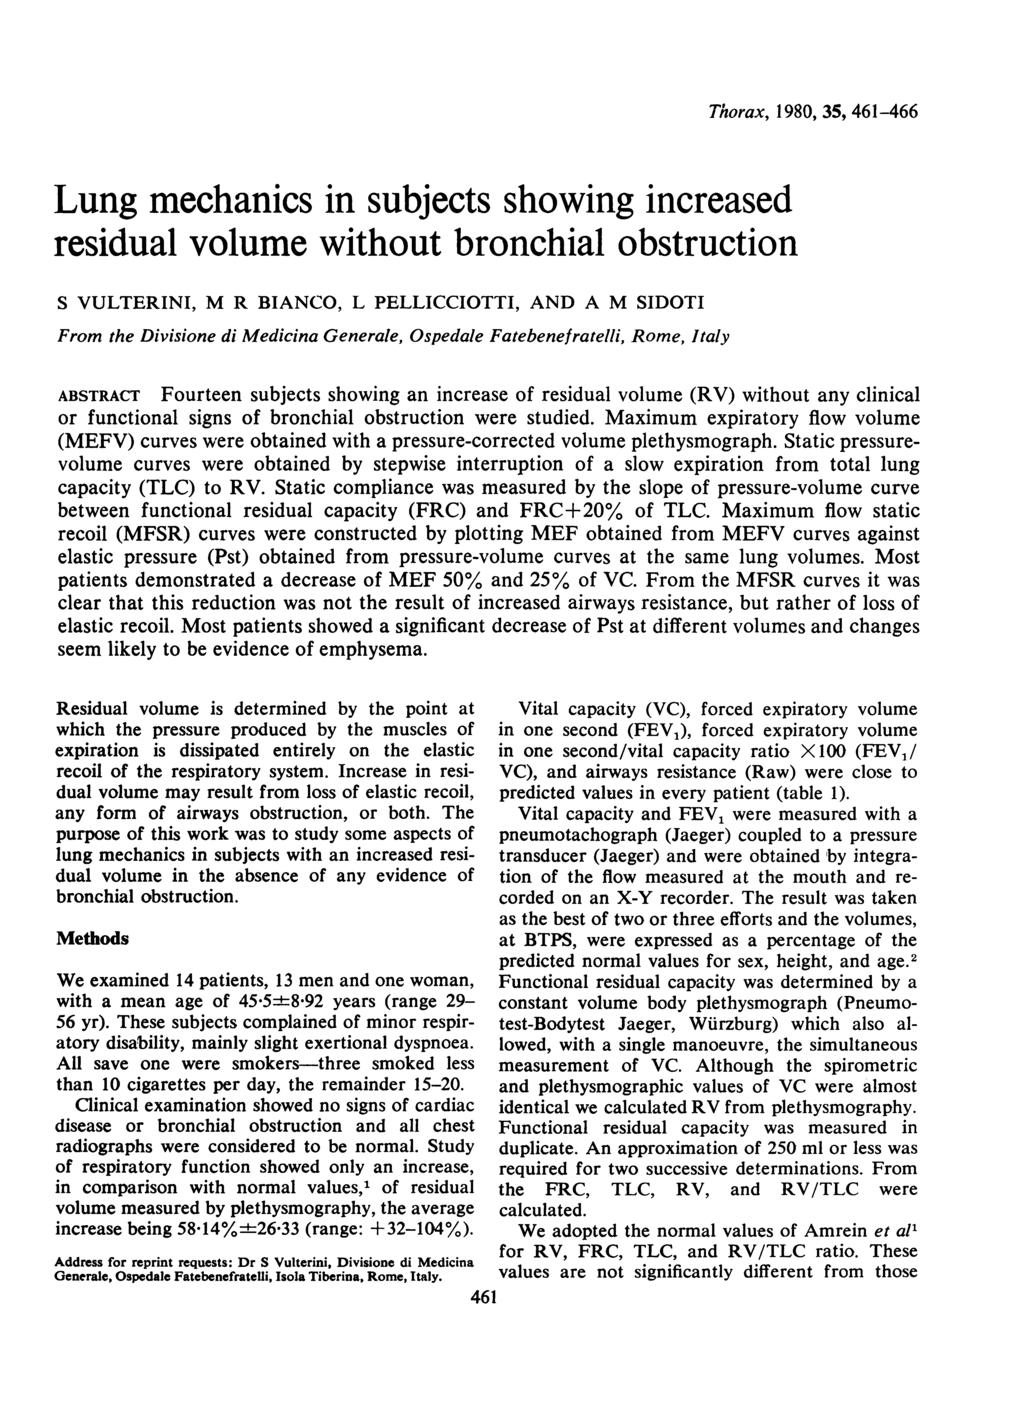 Lung mechanics in subjects showing increased residual volume without bronchial obstruction S VULTERINI, M R BIANCO, L PELLICCIOTTI, AND A M SIDOTI From the Divisione di Medicina Generale, Ospedale